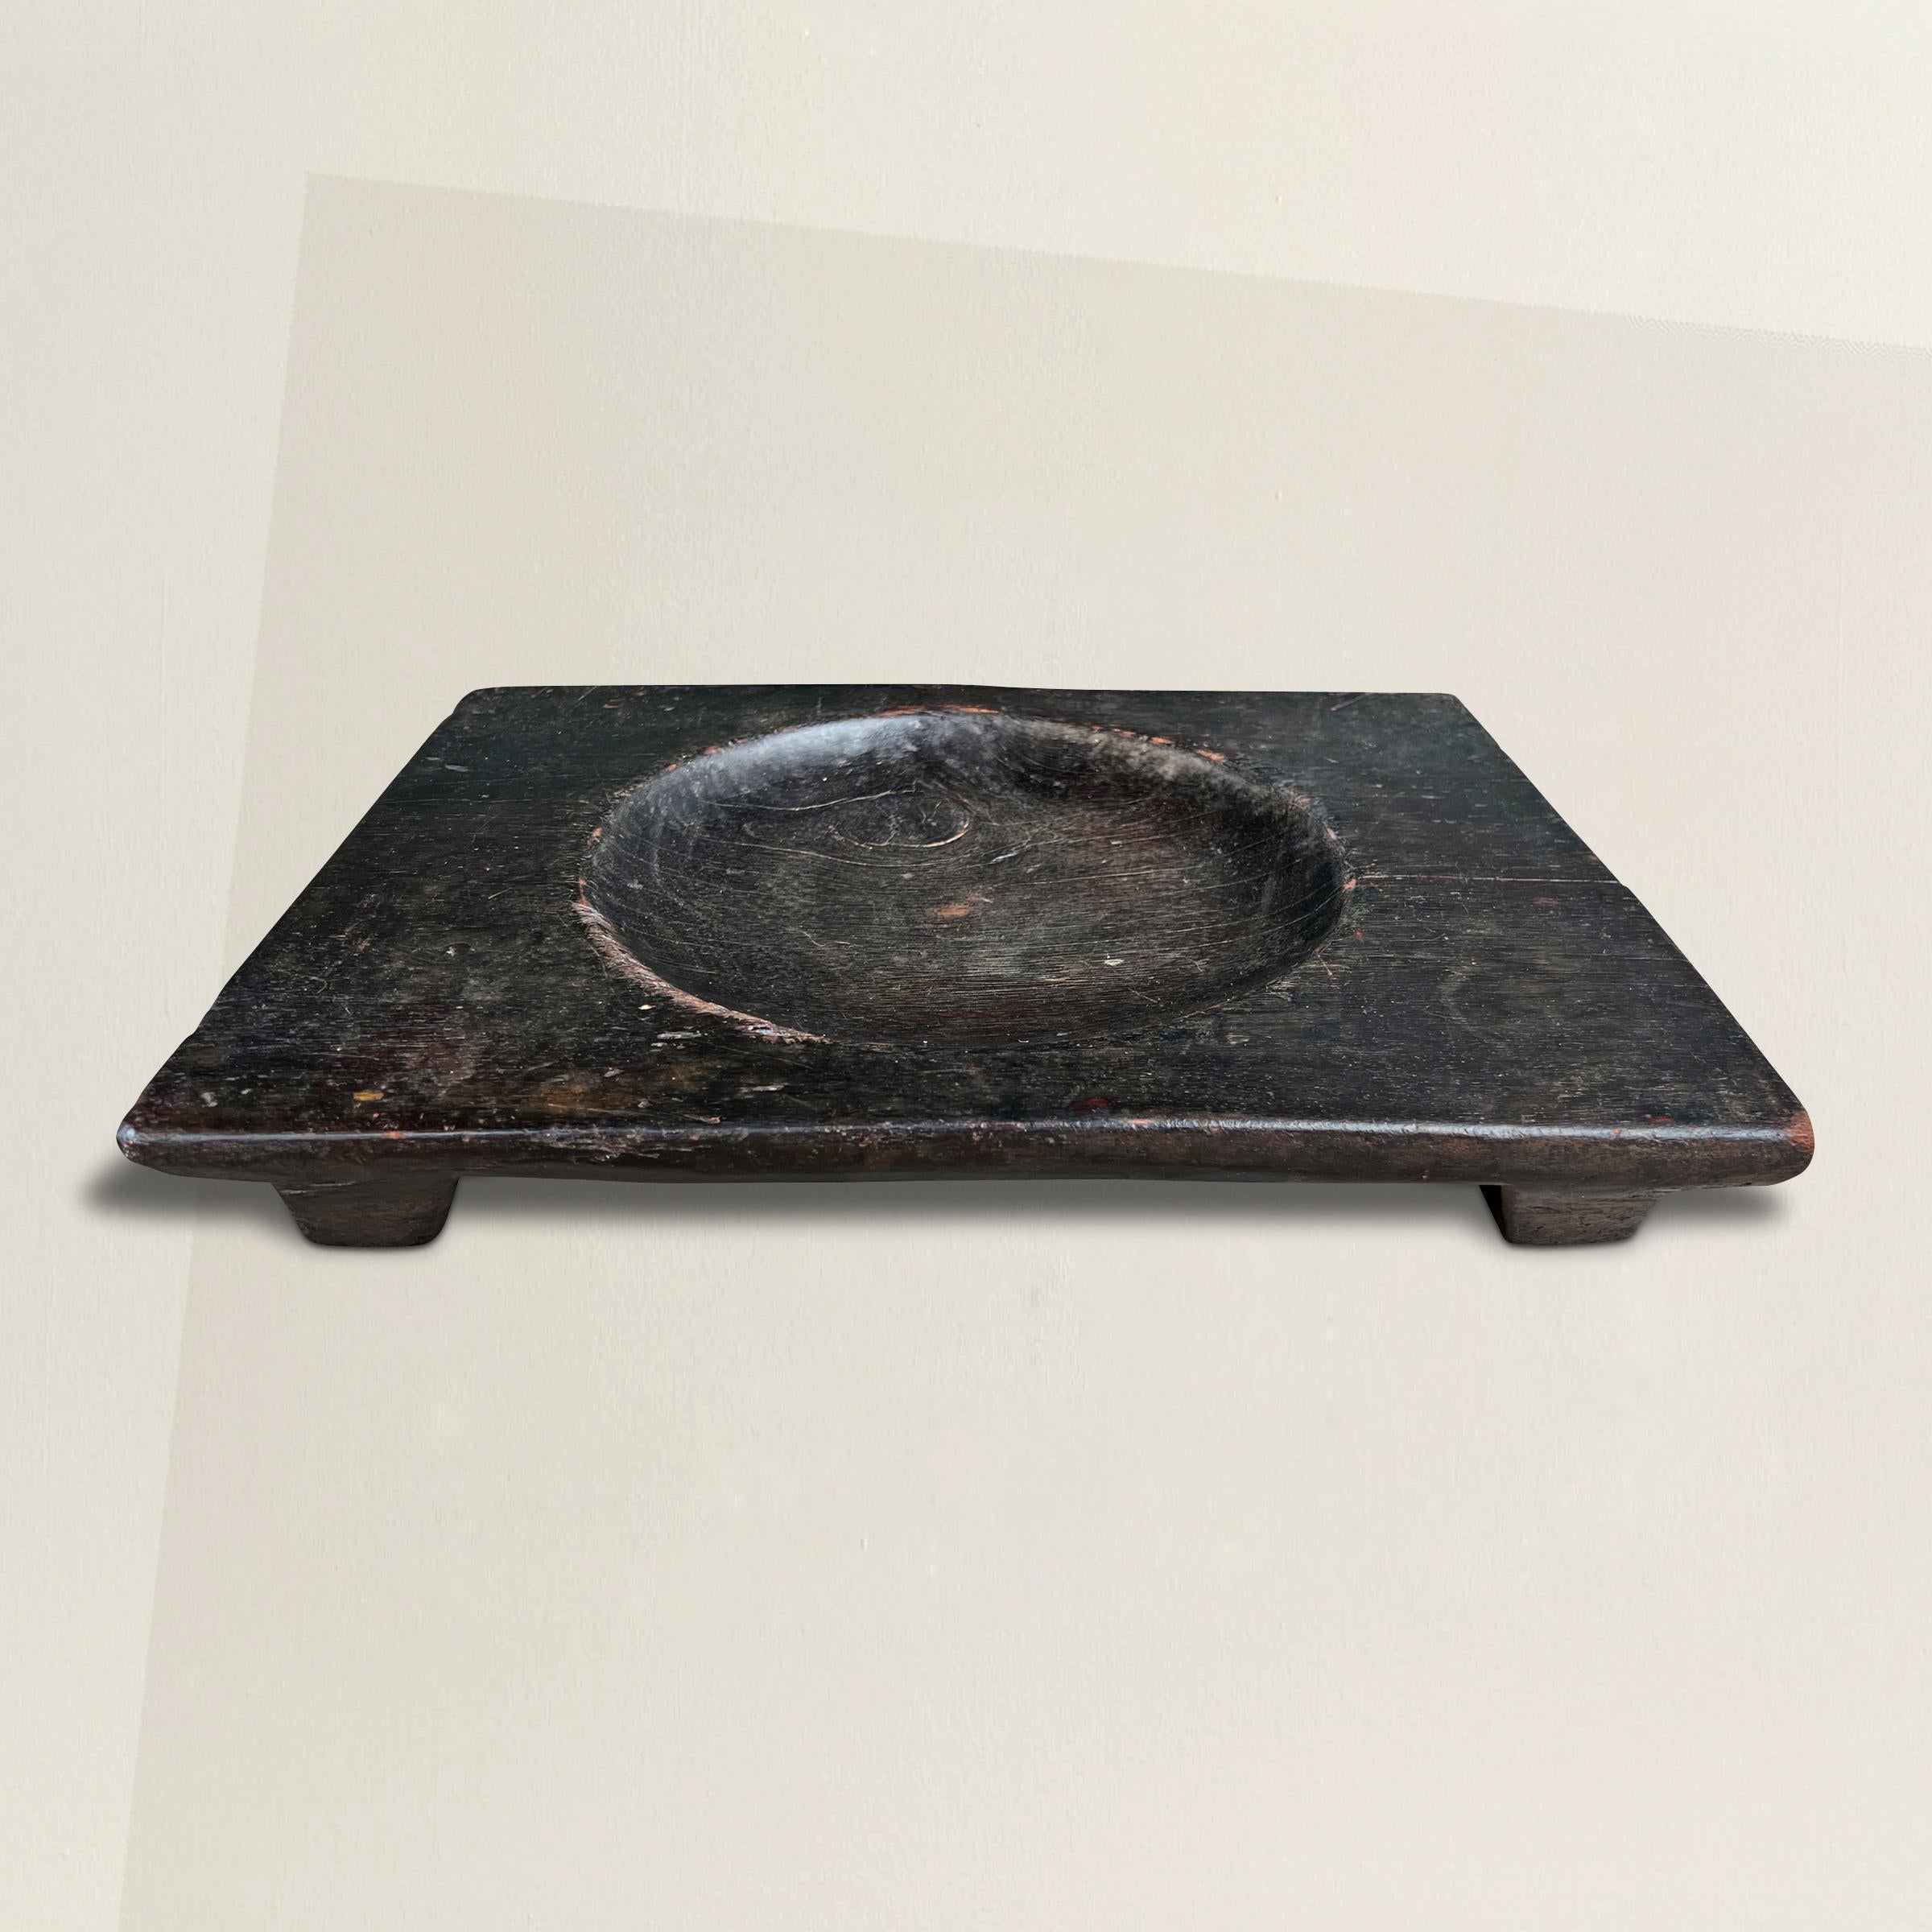 A chic and modern-in-spirit early 20th century Japanese hand-carved wooden tray of rectangular form raised on two runners, and with a circular convex bowl in the center. There are several knife marks on one side making us believe that this was used